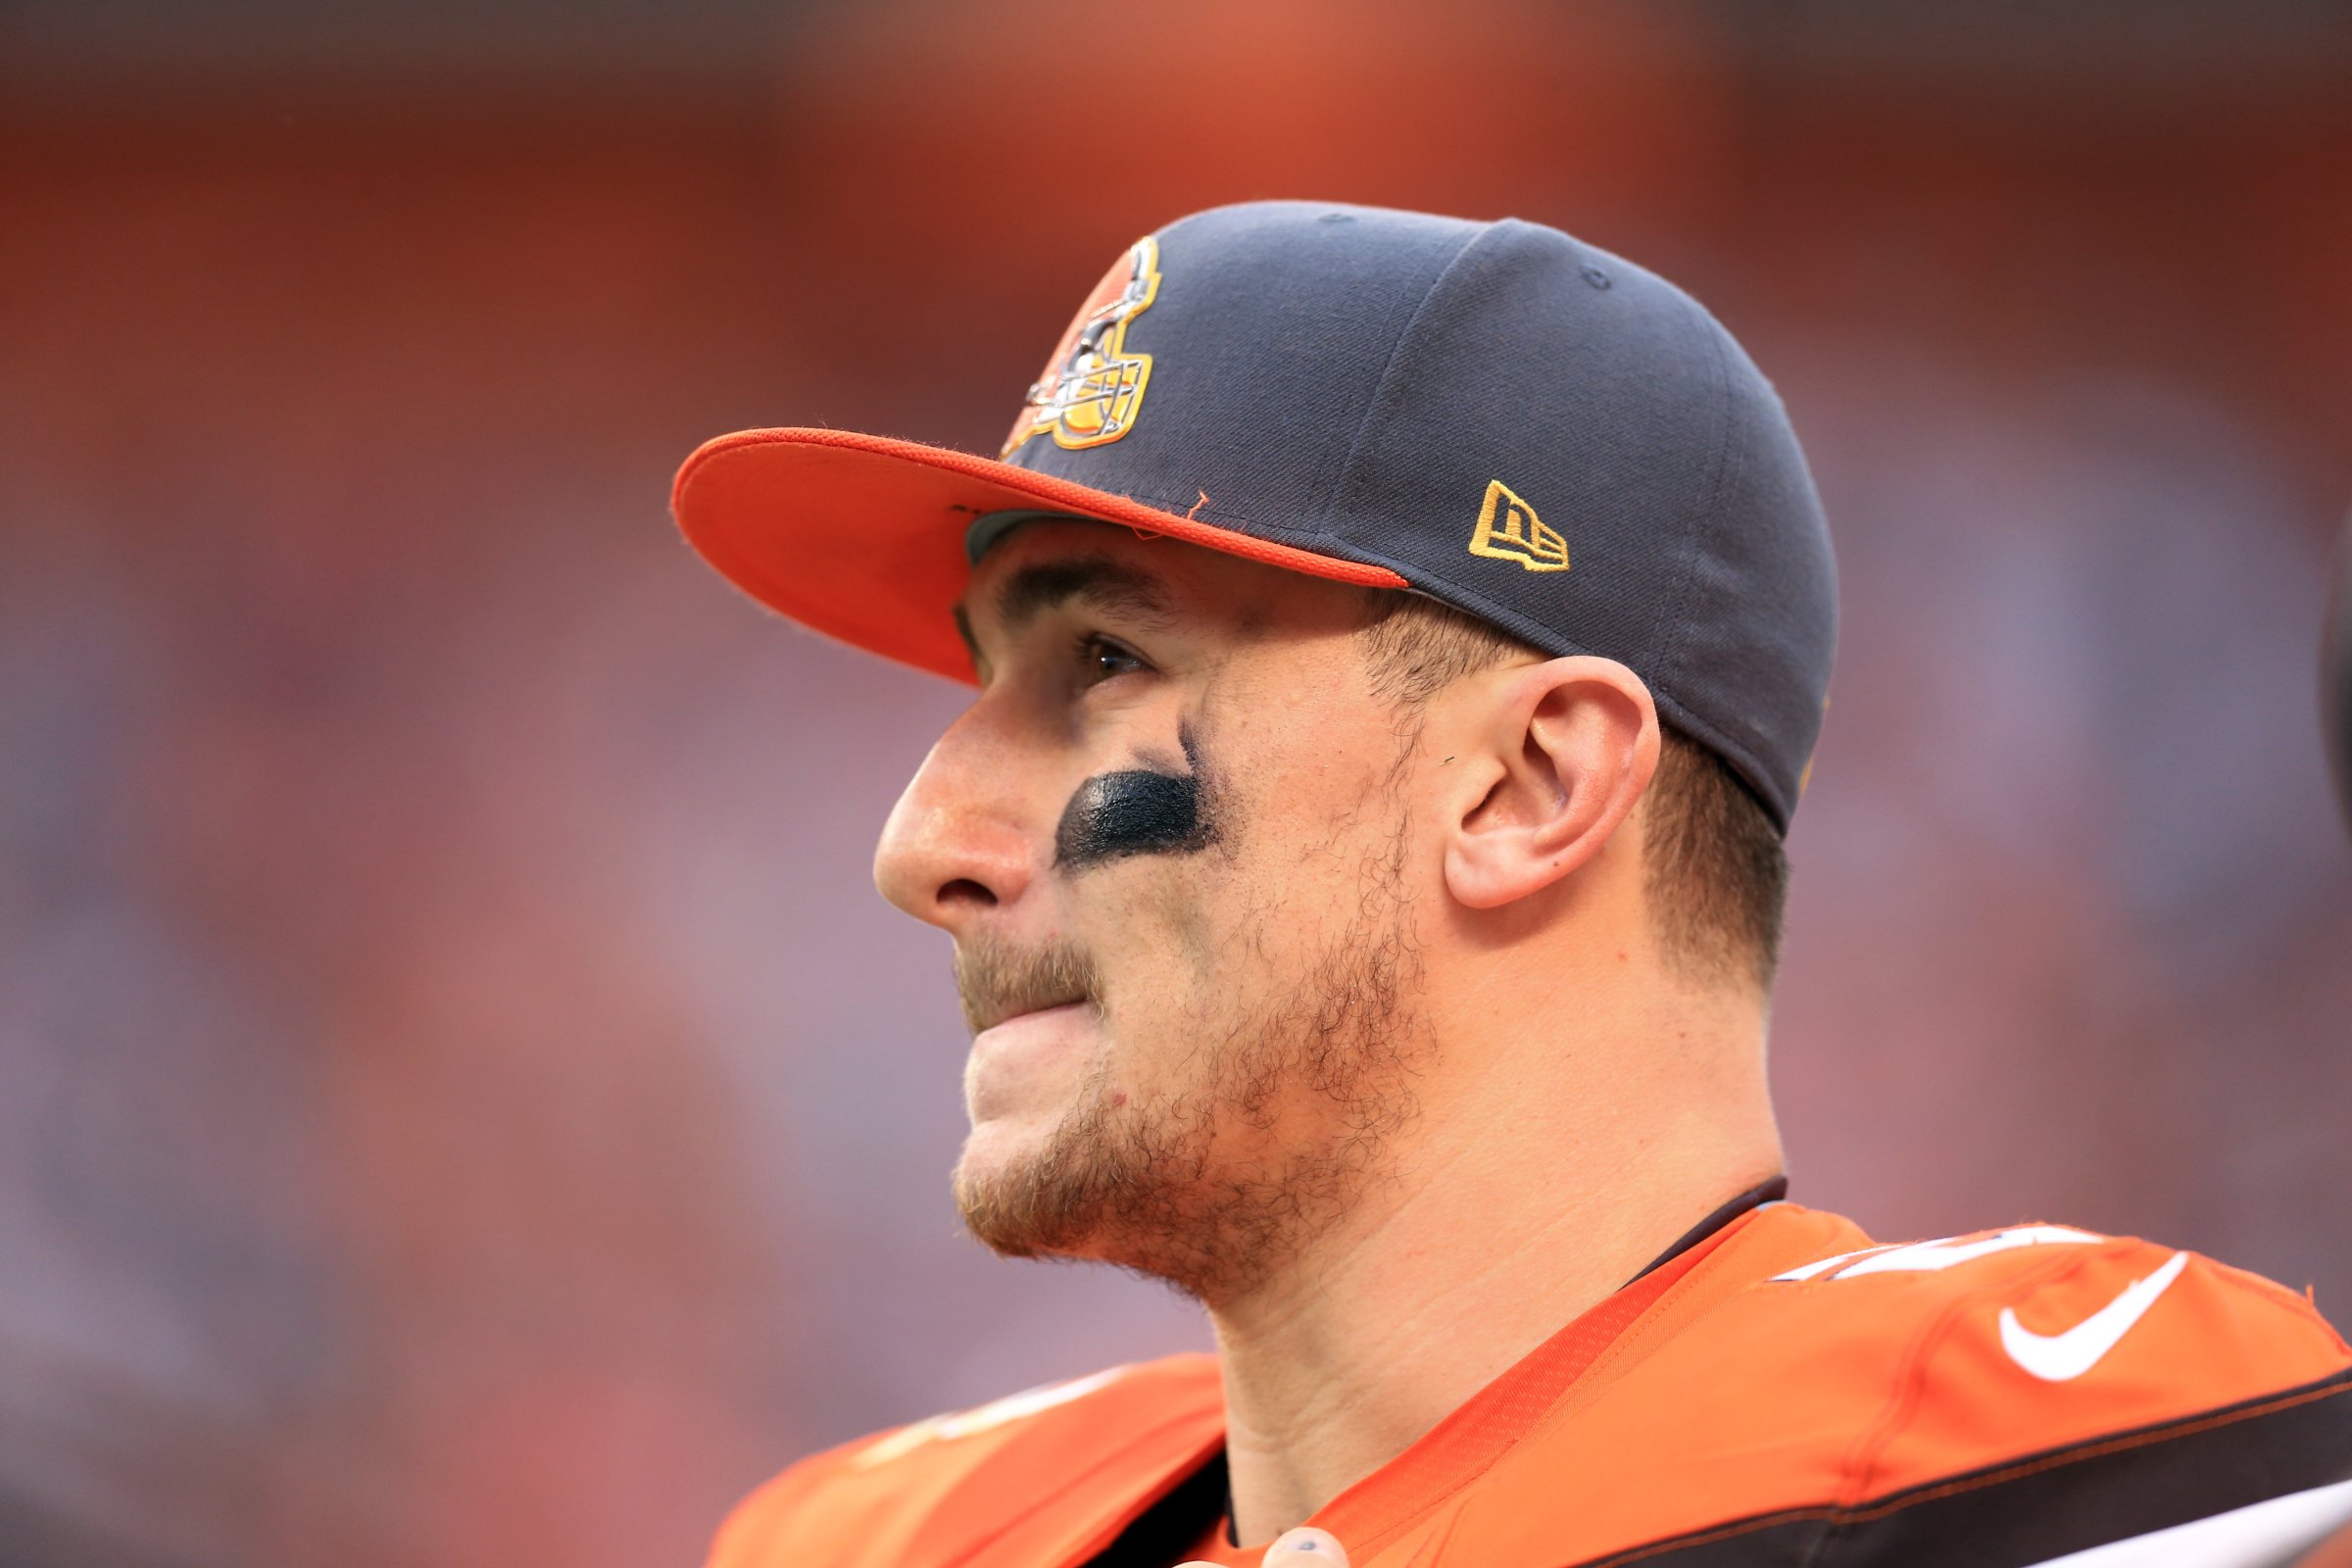 Quarterback Johnny Manziel #2 of the Cleveland Browns on the sidelines during the fourth quarter against the San Francisco 49ers at FirstEnergy Stadium on December 13, 2015 in Cleveland, Ohio.